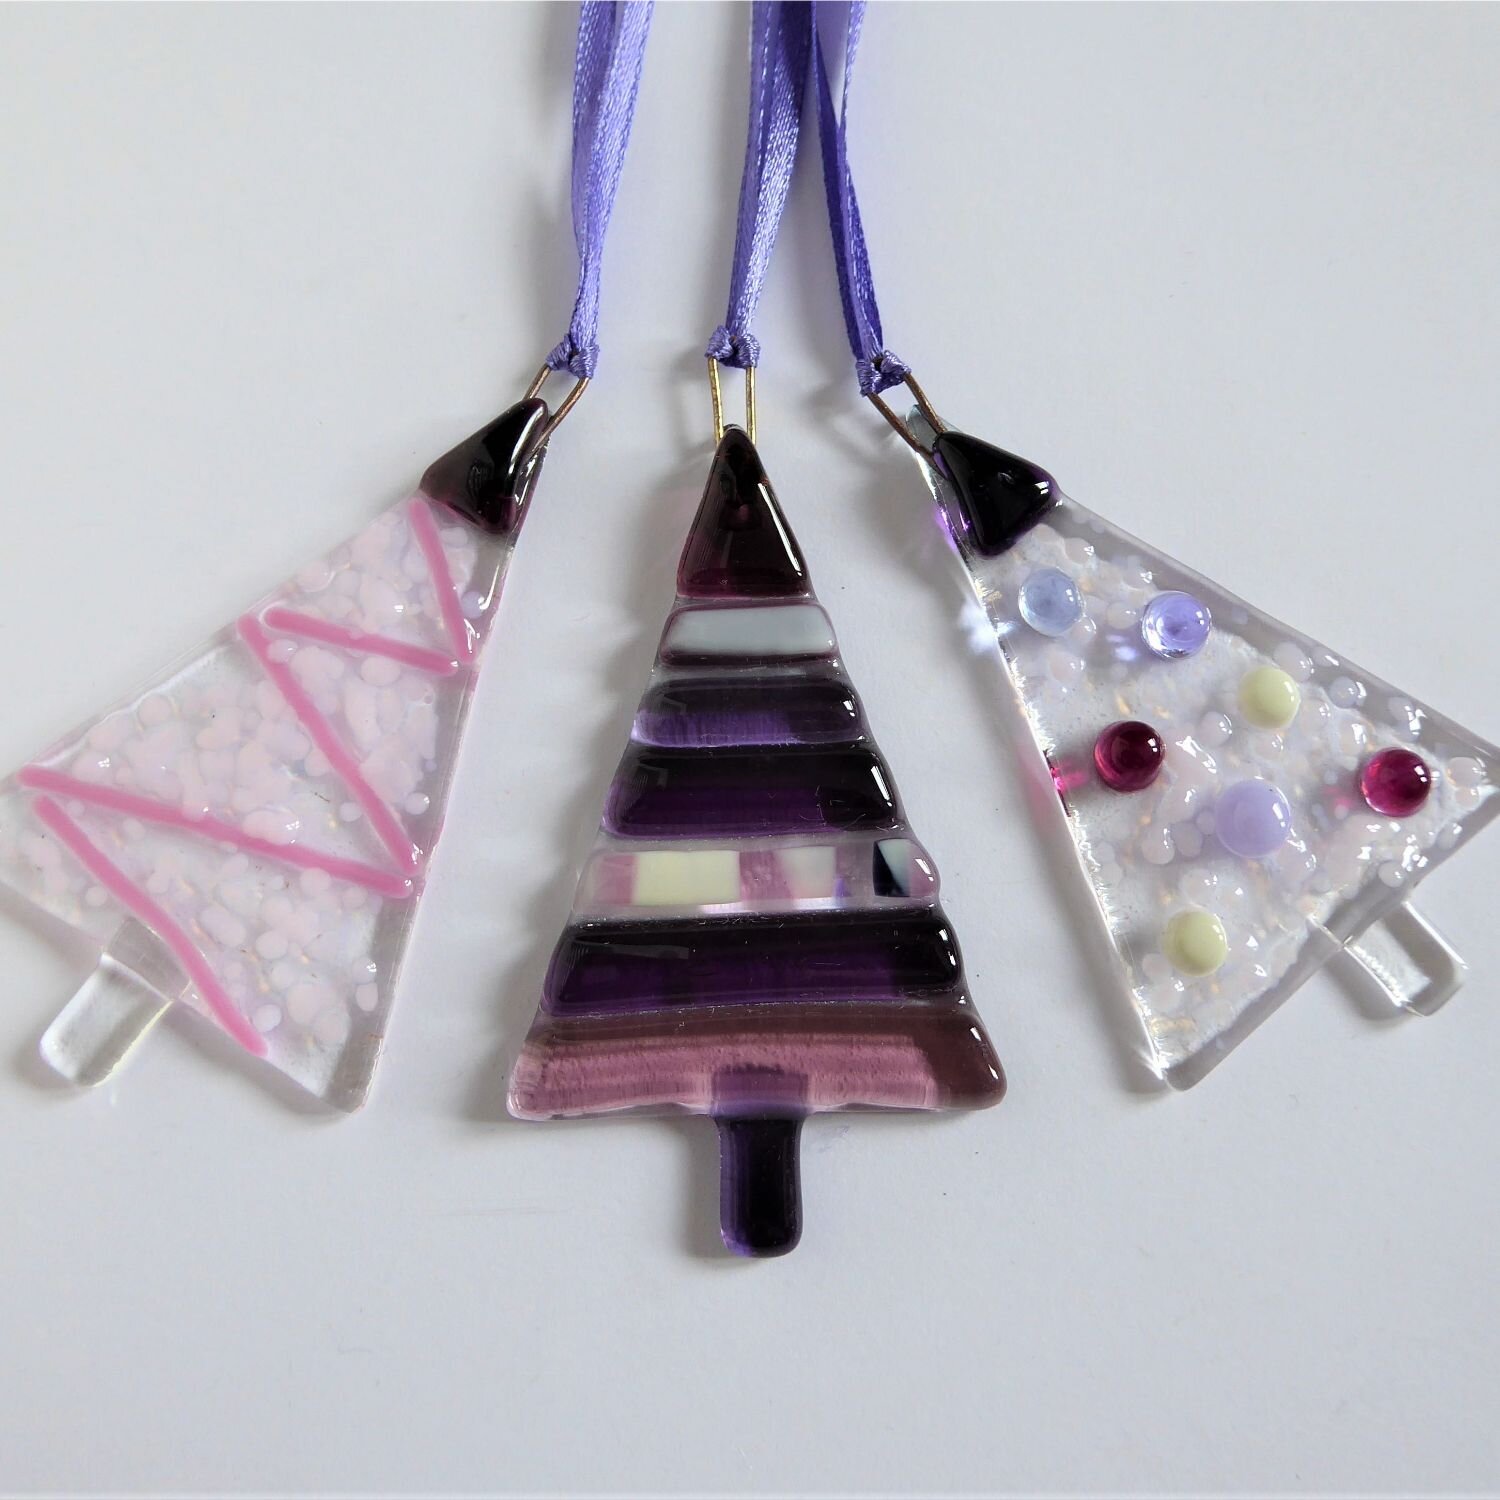  A set of three pink fused glass tree-shaped Christmas decorations by Eva Glass Design 